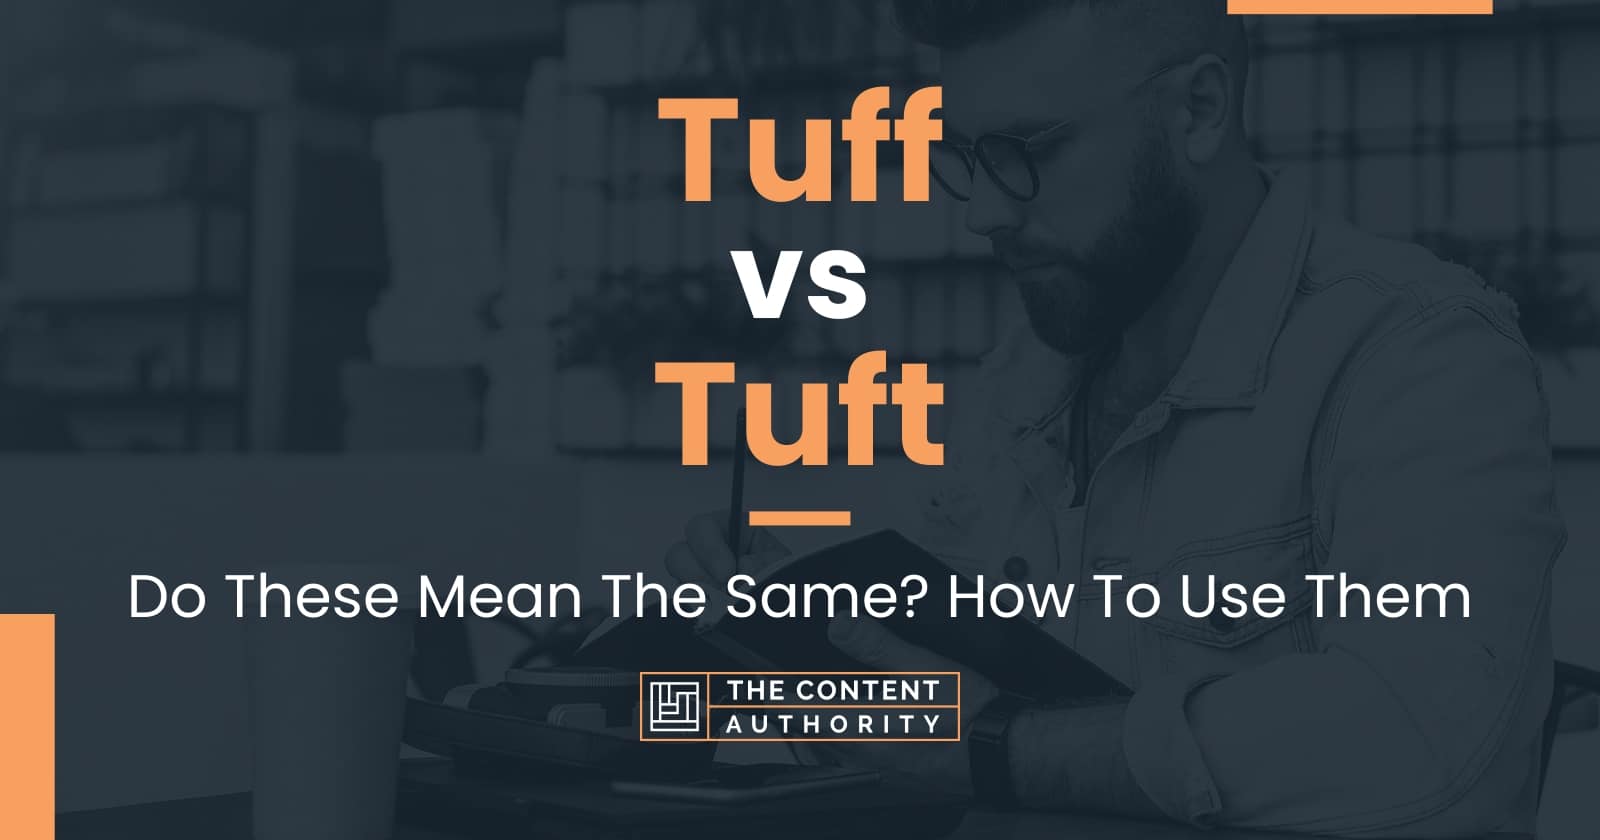 Tuff vs Tuft: Do These Mean The Same? How To Use Them